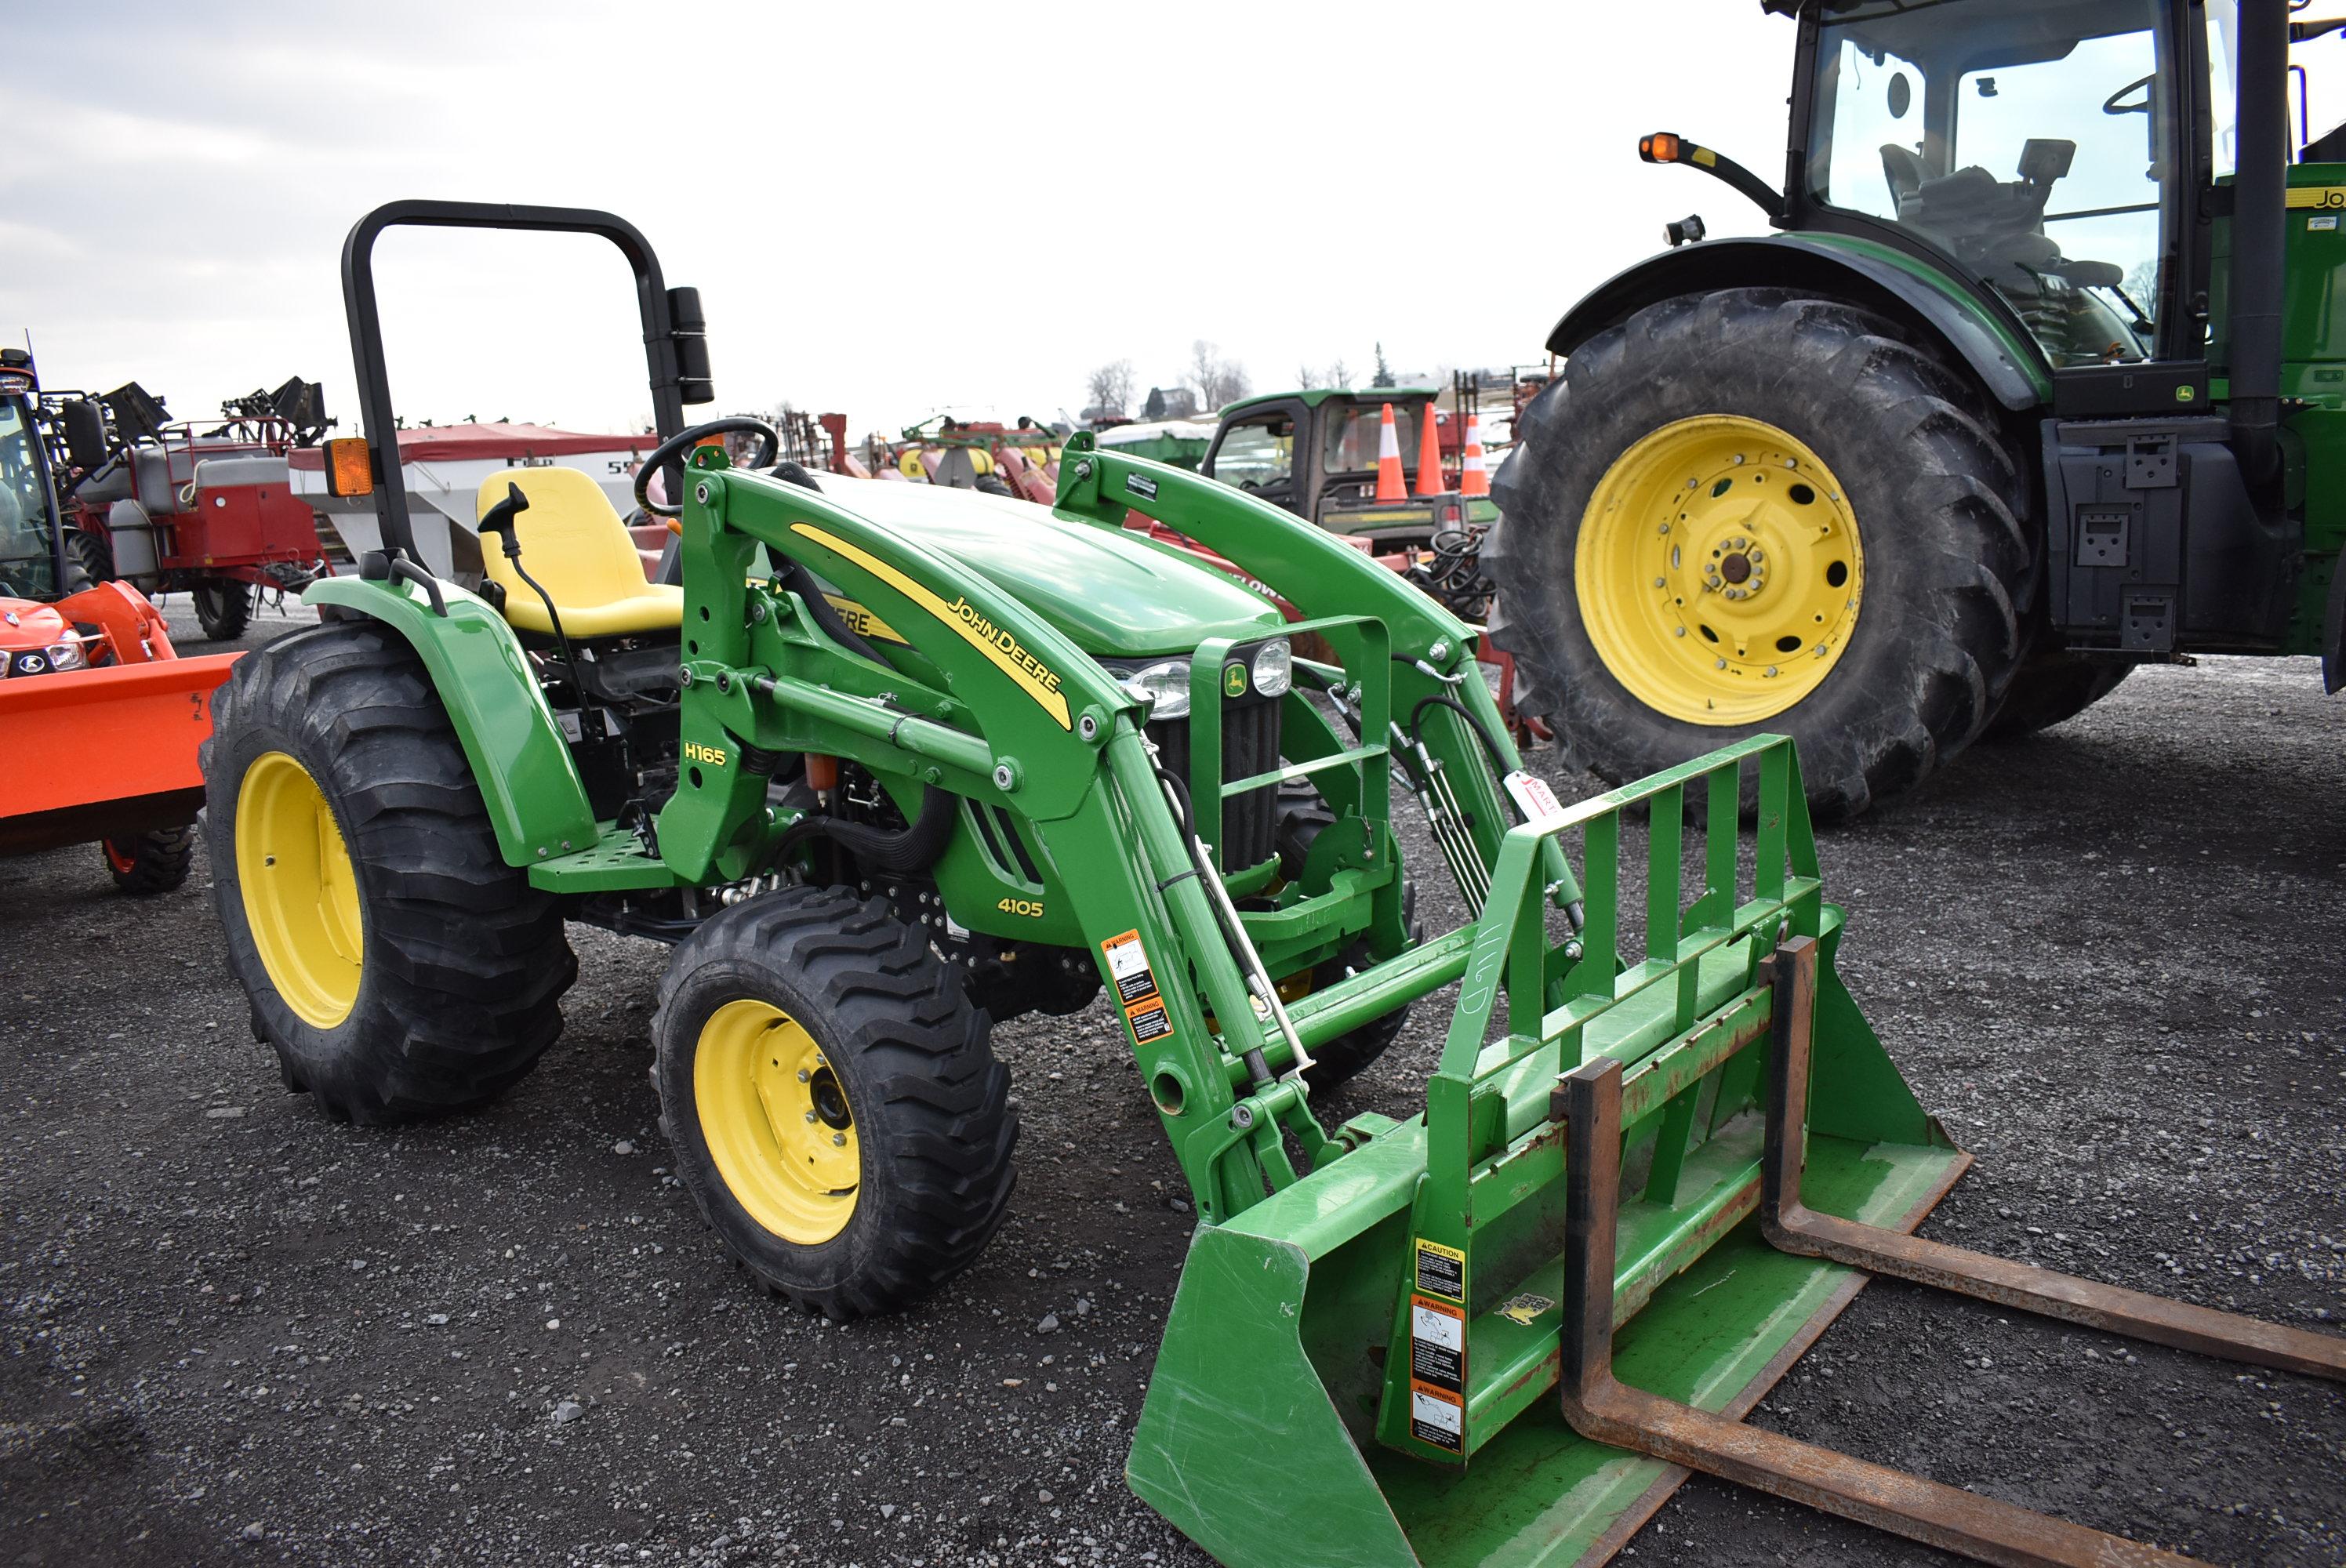 '16 JD 4105 compact w/ H165 loader w/ bucket & forks, 258hrs, hydro, 4wd, diesel, open station w/ RO